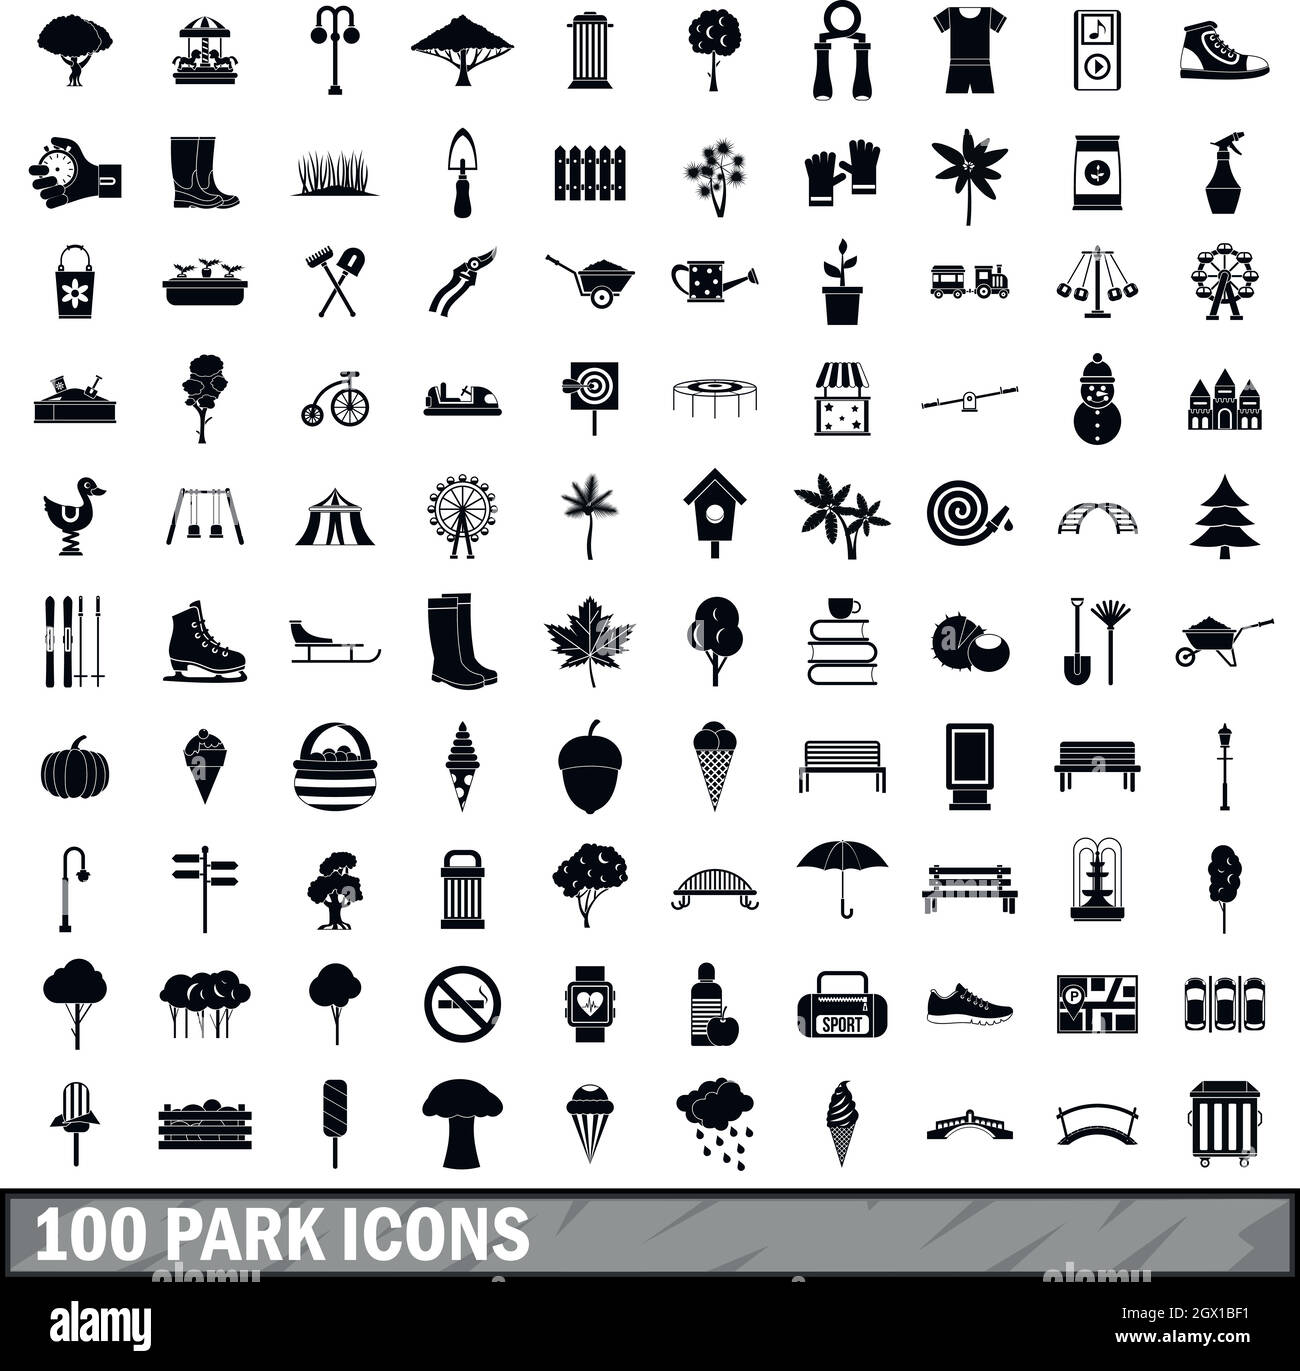 100 park icons set in simple style Stock Vector